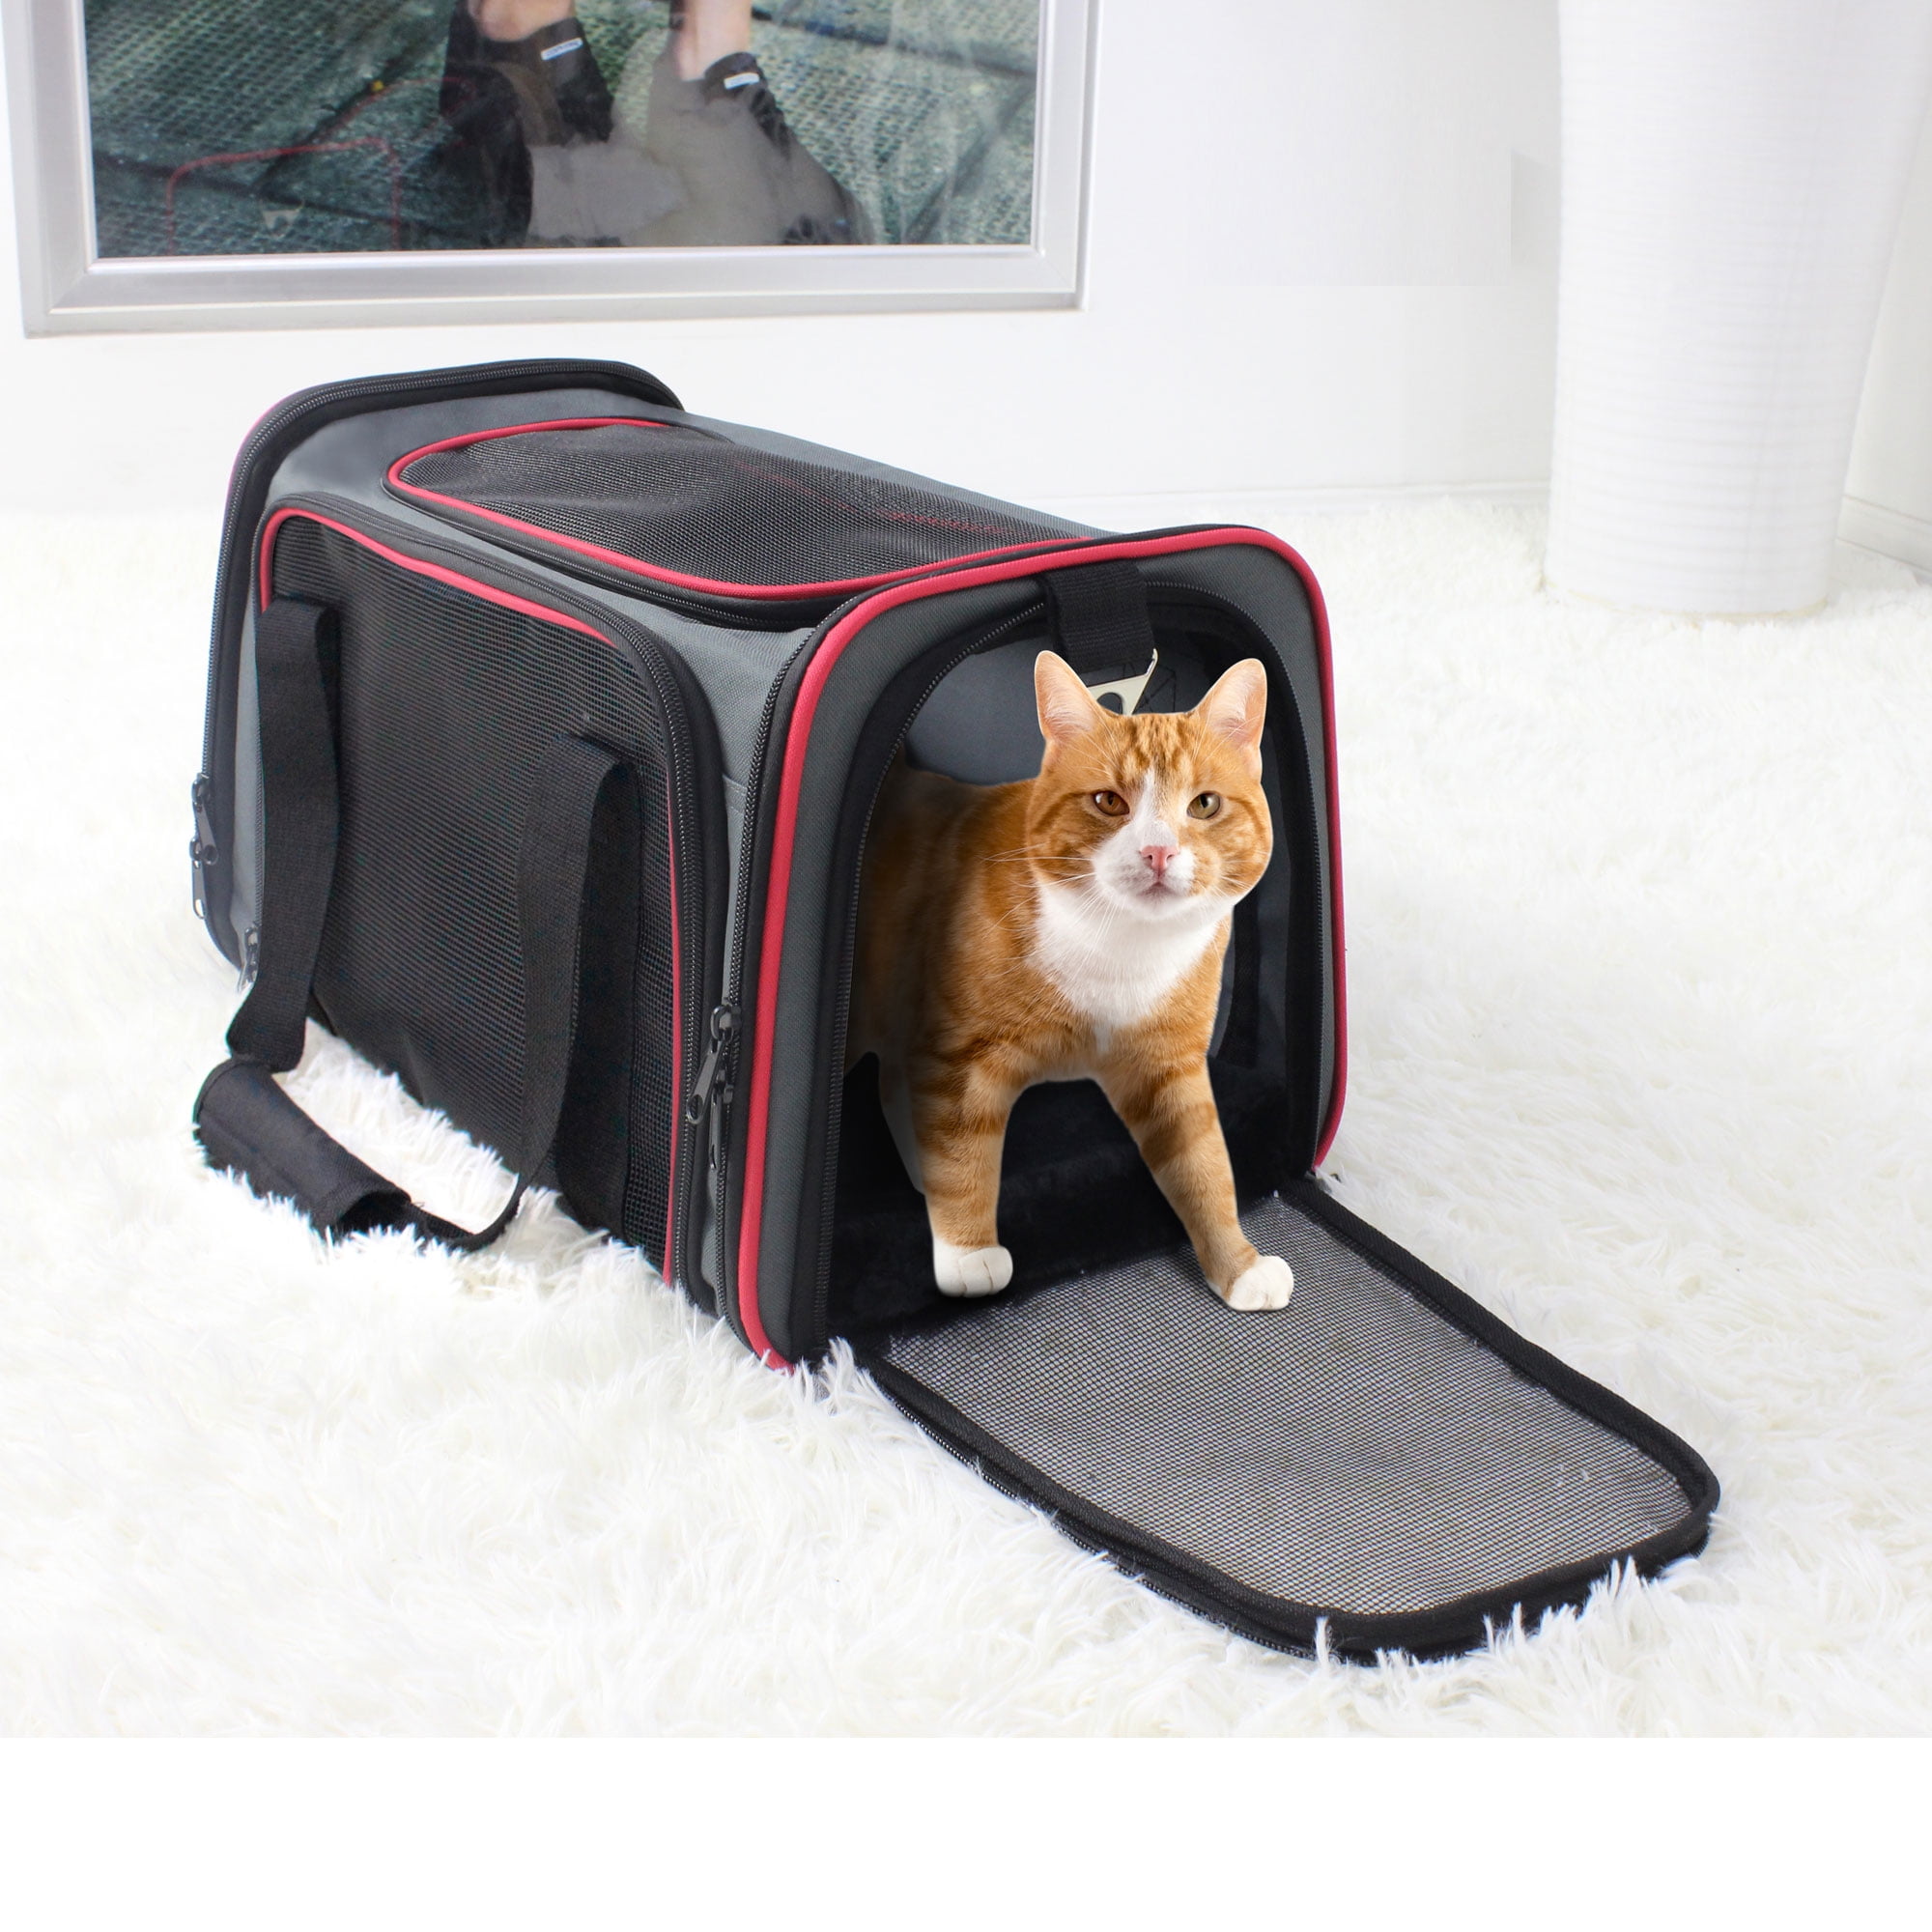 GOOPAWS Soft Sided Pet Carrier Perfect for Travel, Smoke Grey, 17